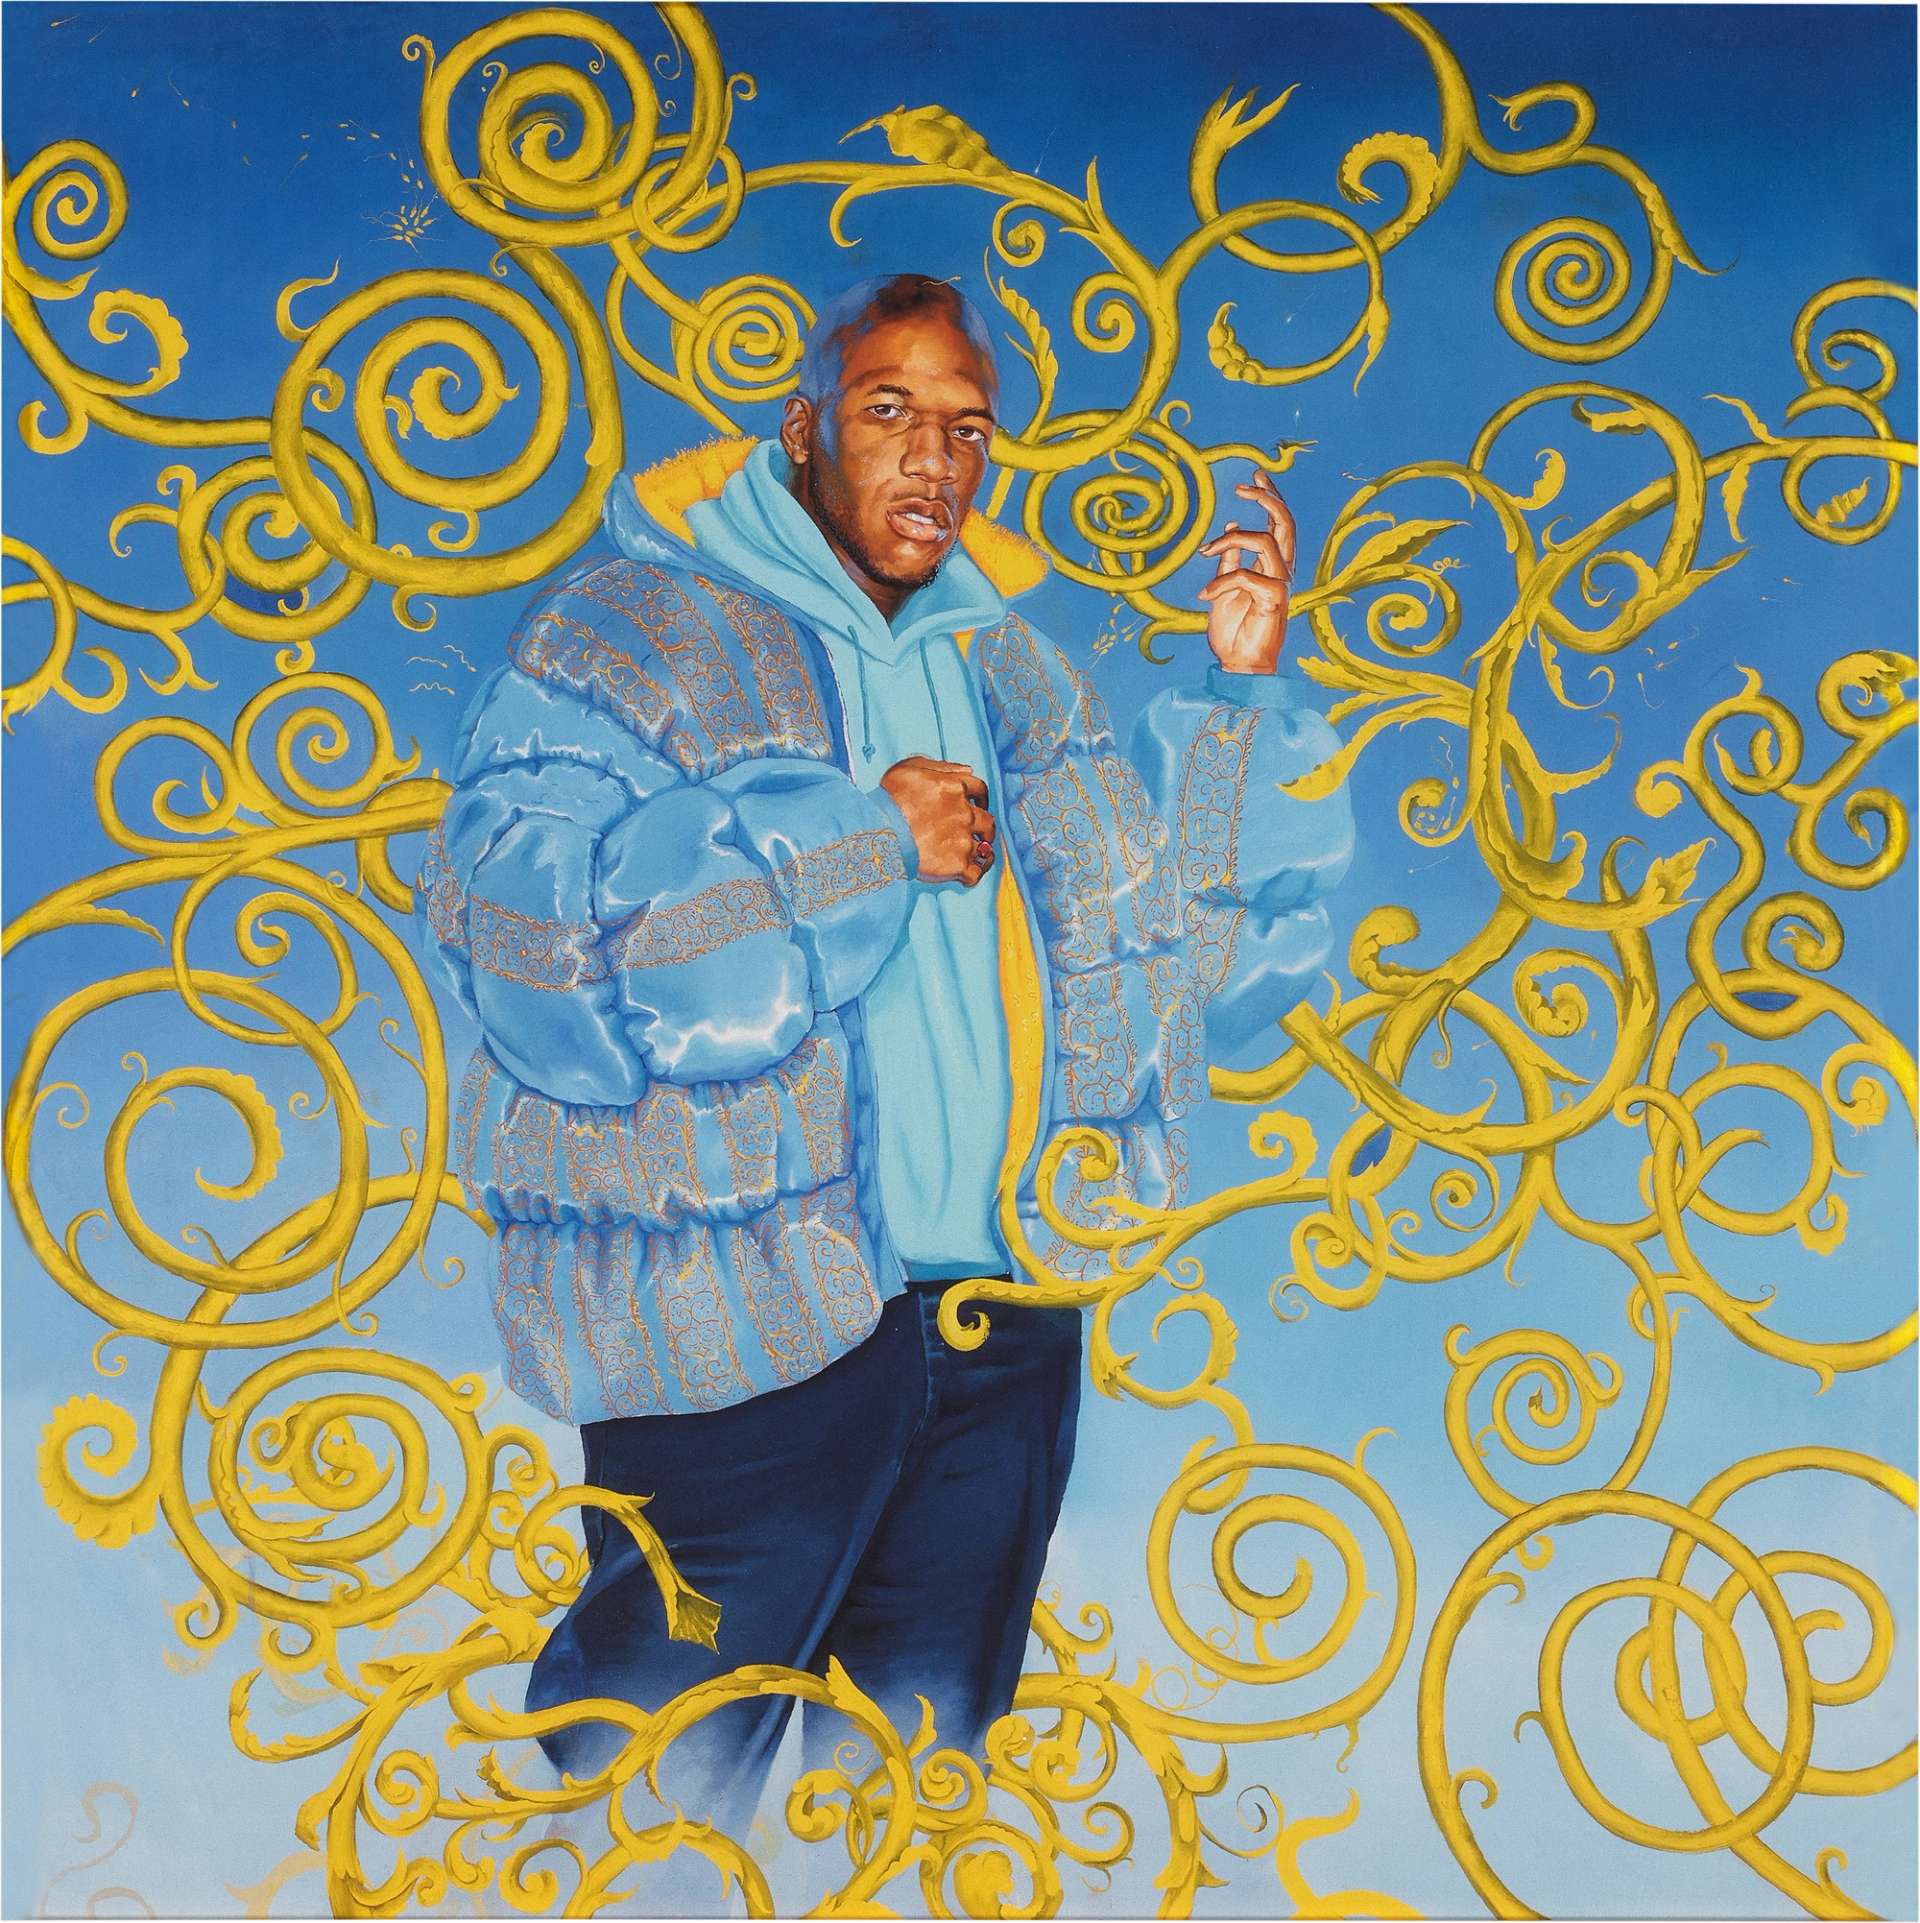 A portrait by Kehinde Wiley showing a young man wearing a puffer jacket, set against a light blue background with yellow motifs around the figure.